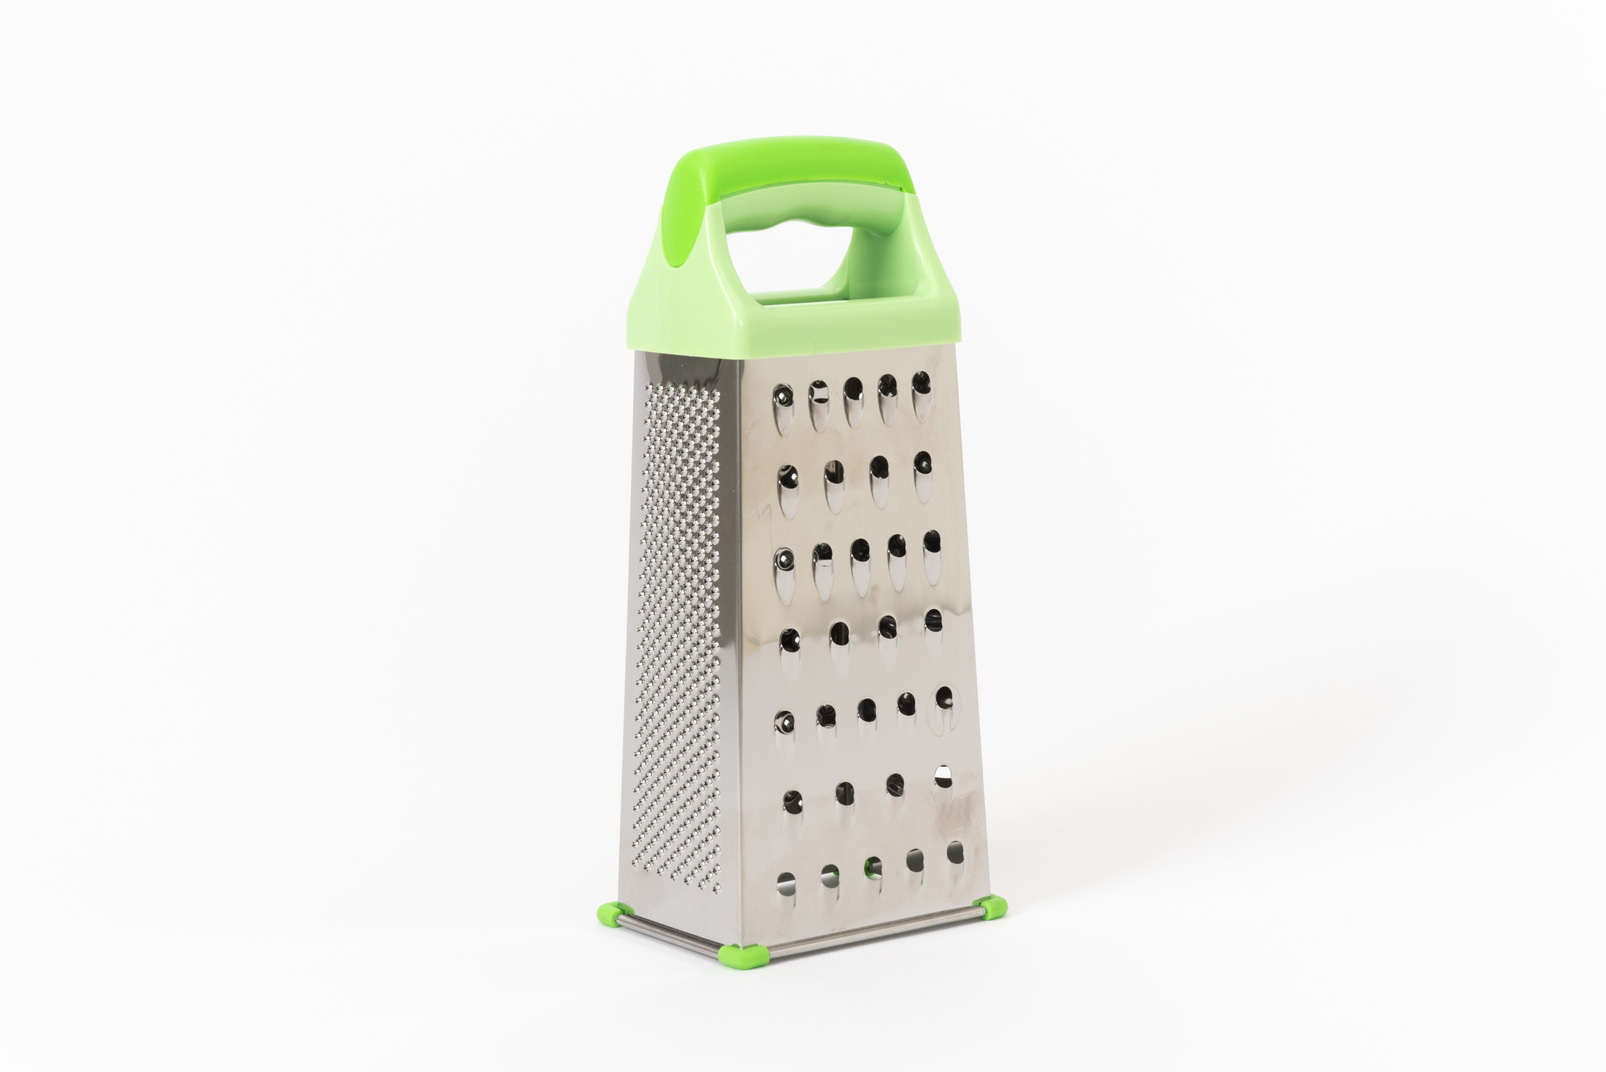 Kitchen utensil for grating foods into fine pieces